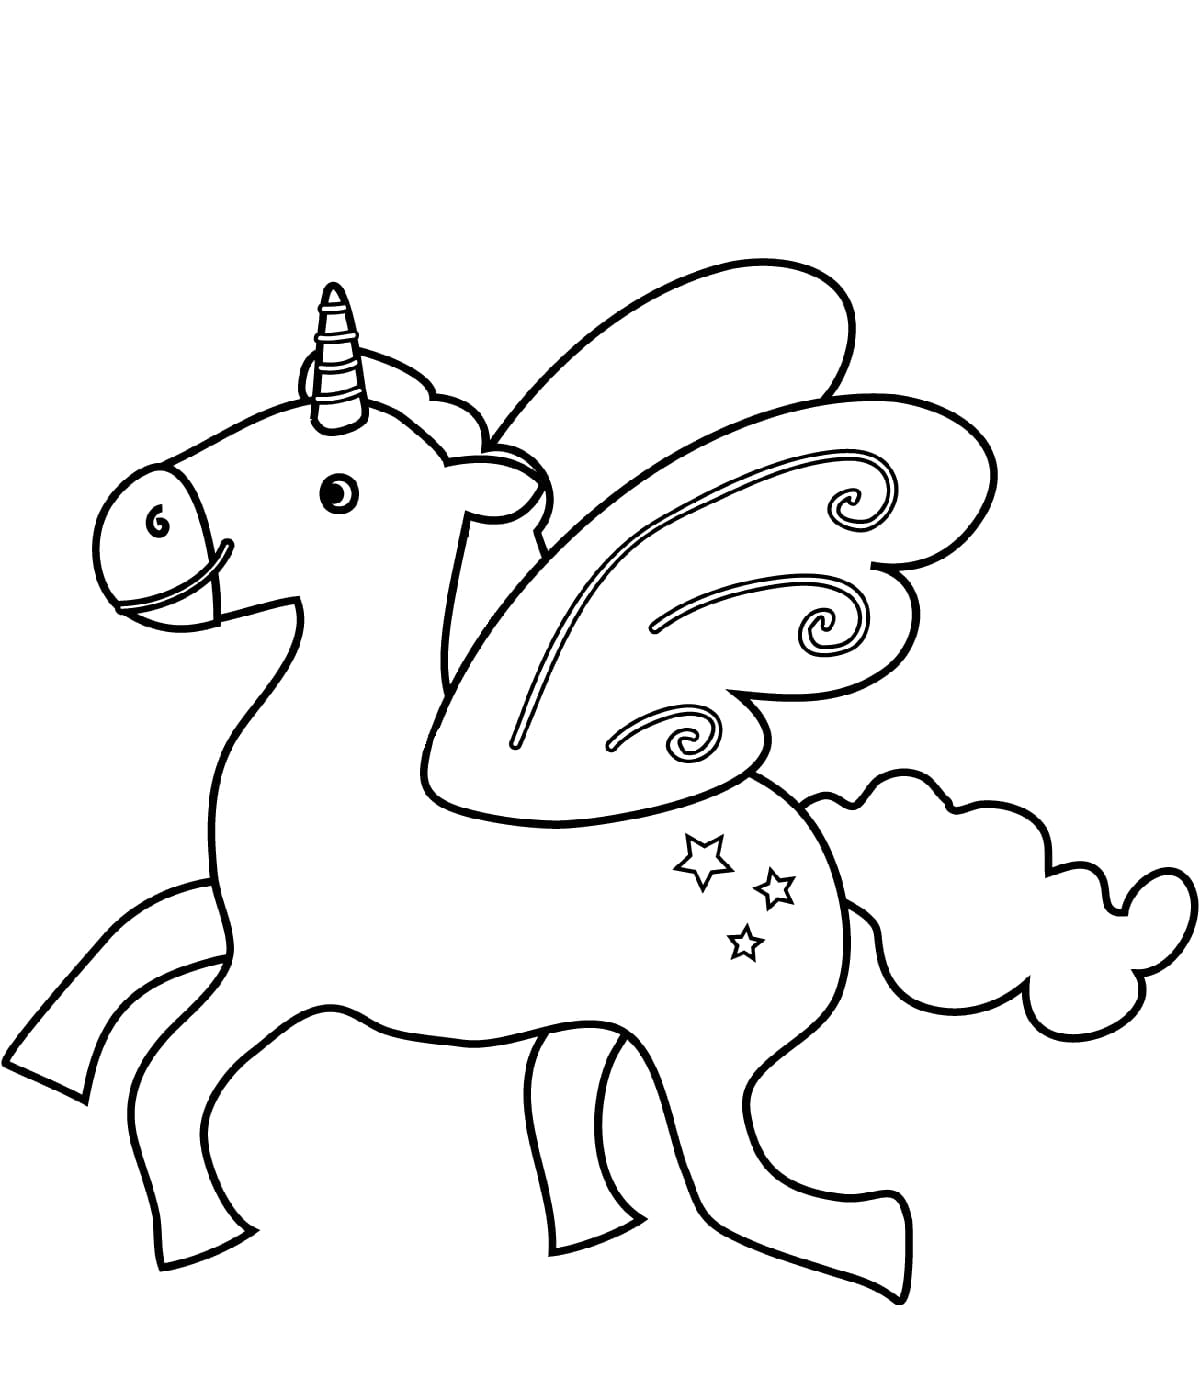 Butterfly Winged Unicorn Coloring Page - Free Printable Coloring Pages